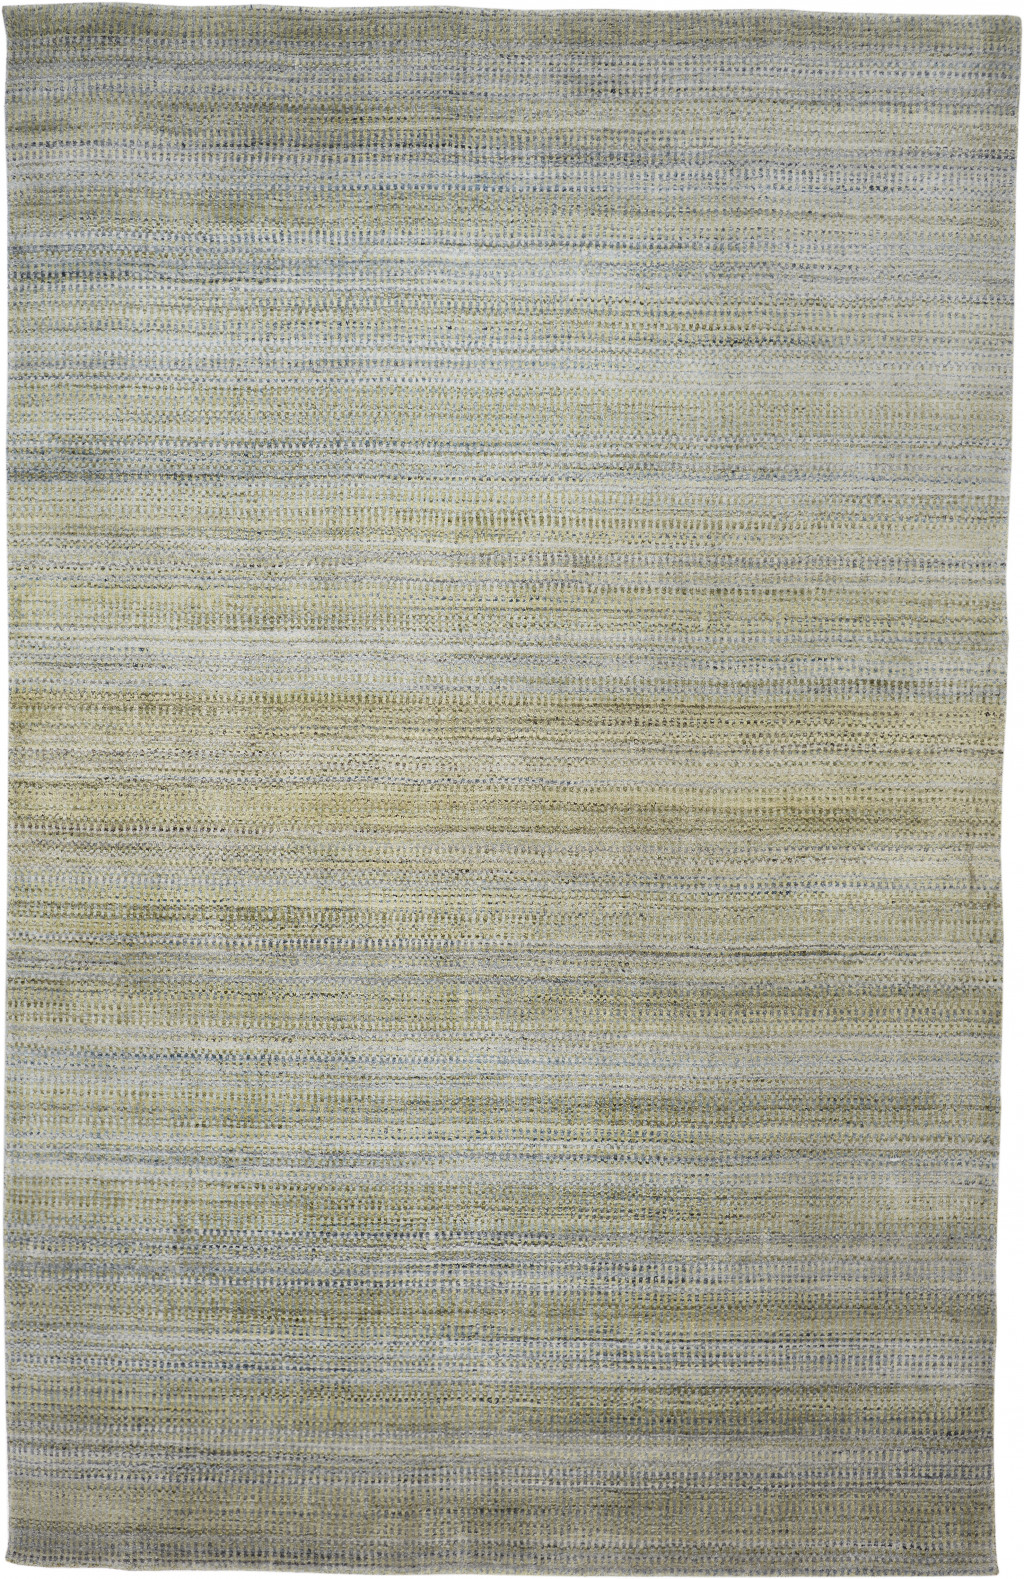 2' X 3' Green Blue And Tan Ombre Hand Woven Area Rug-511728-1